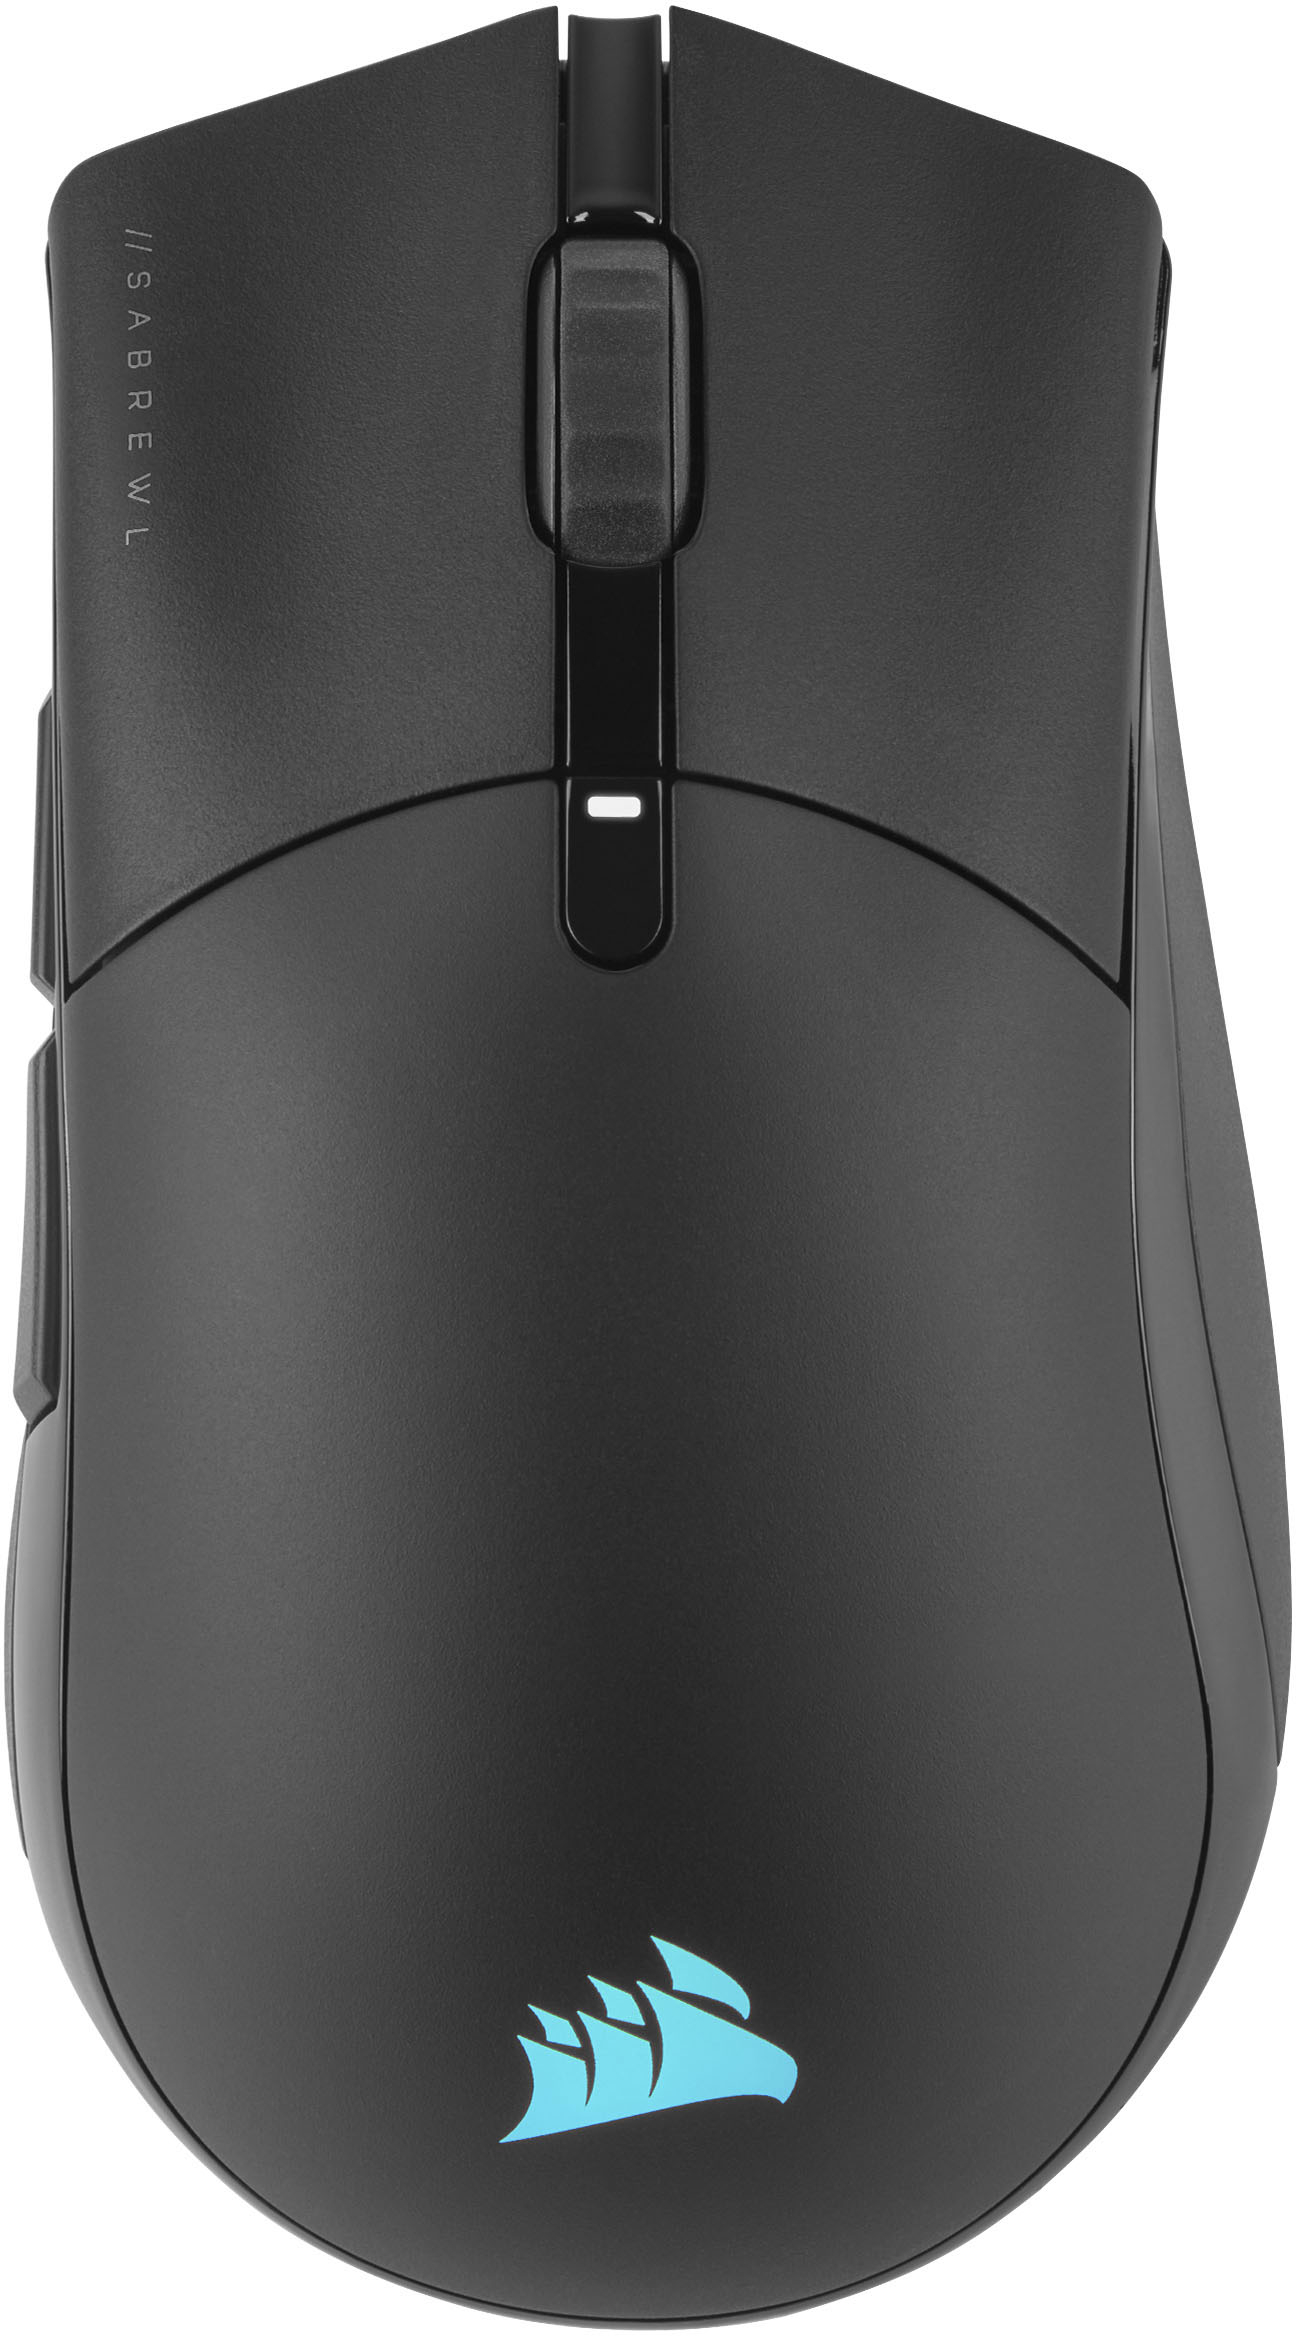 CORSAIR - CHAMPION SERIES SABRE RGB PRO WIRELESS FPS/MOBA Gaming Mouse with 79g Ultra-lightweight design - Black